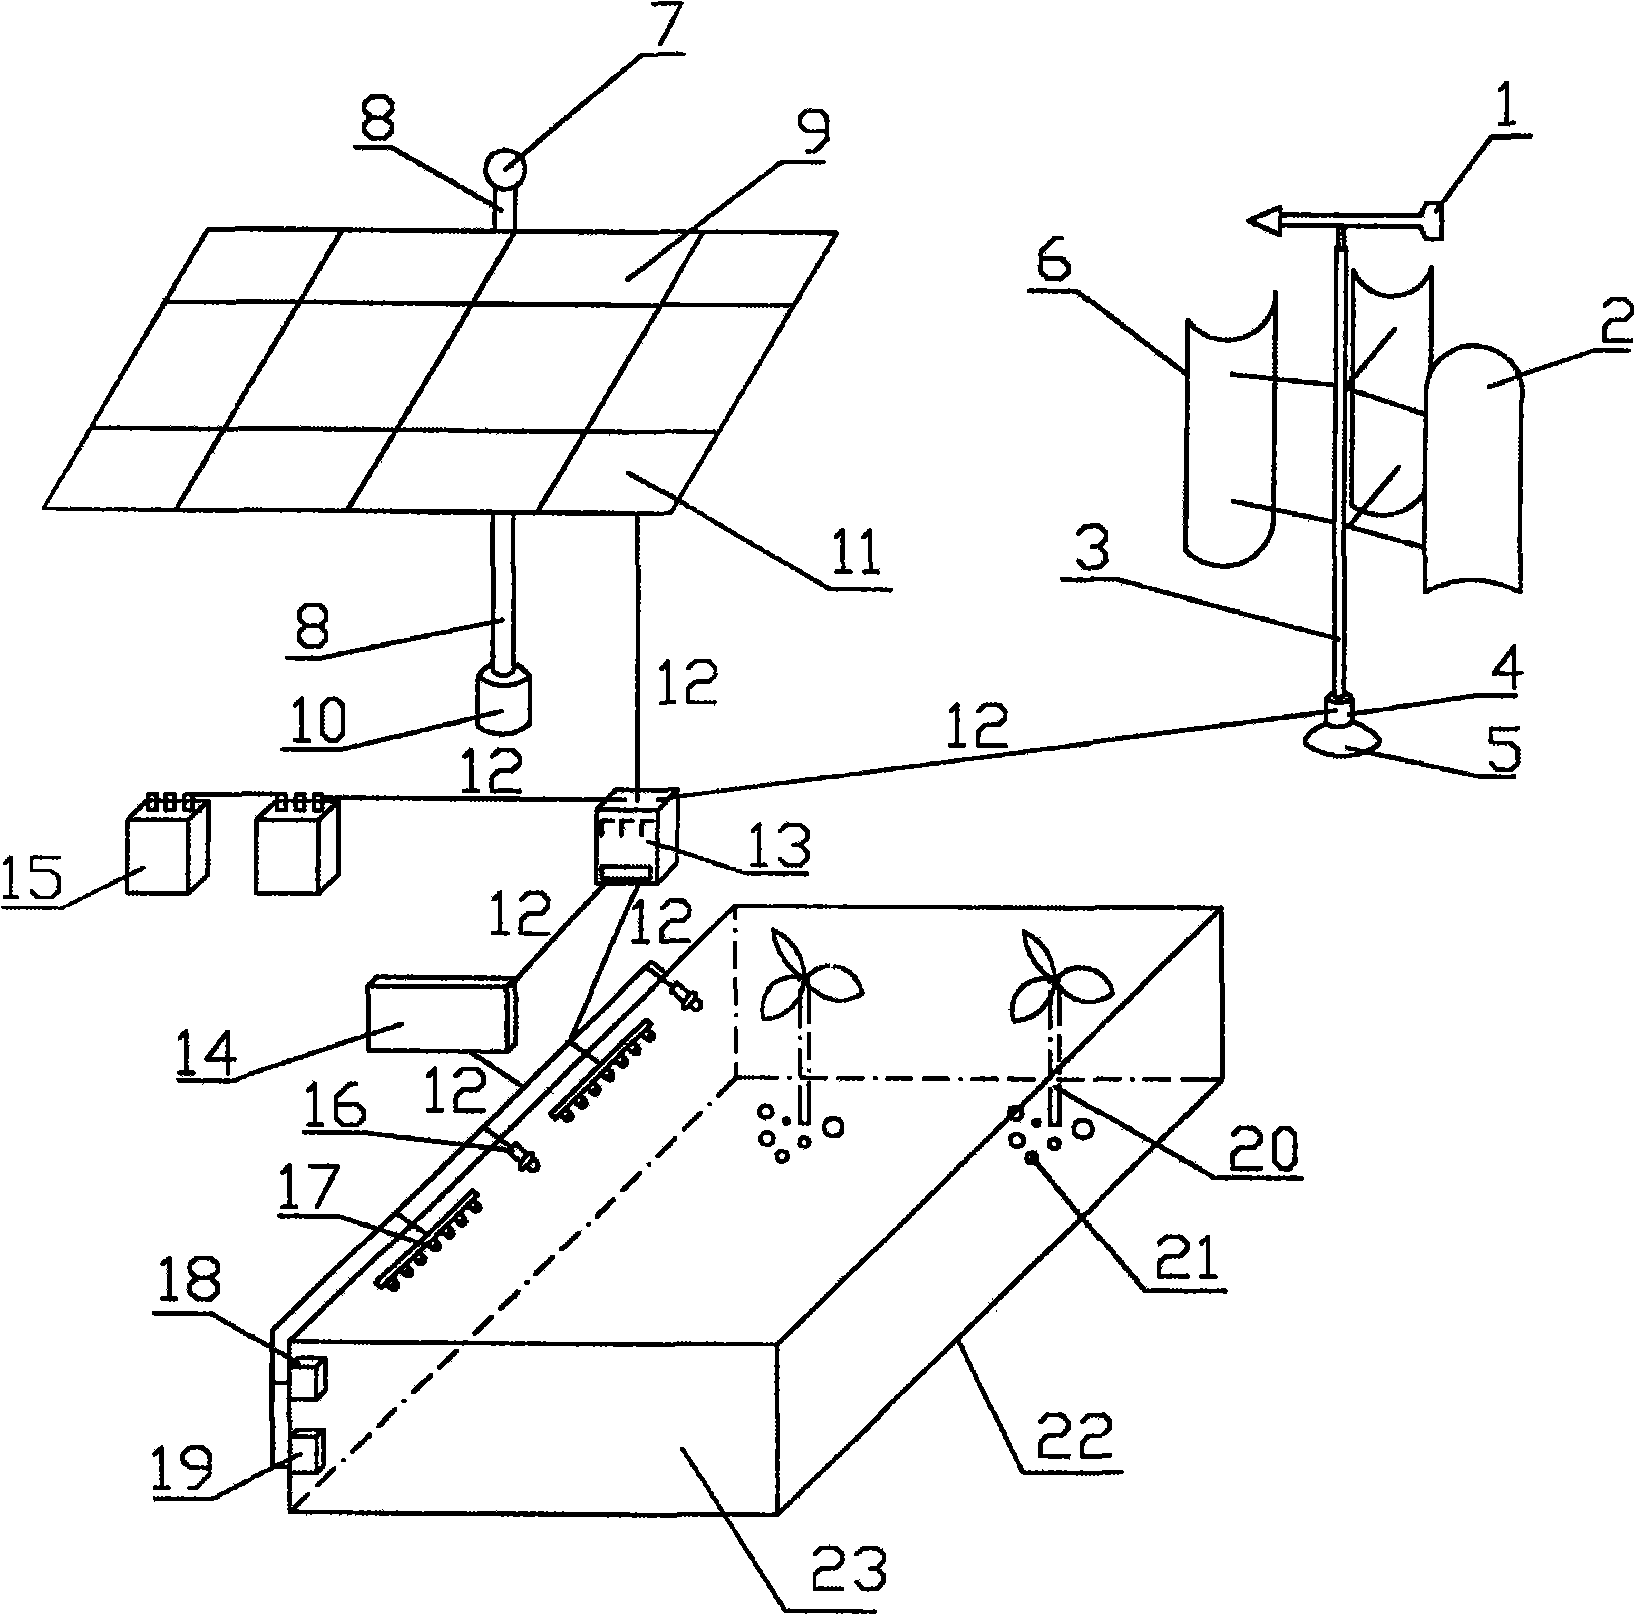 Device for cultivating forestry seedling with complementary applications of solar photovoltaic power and wind power